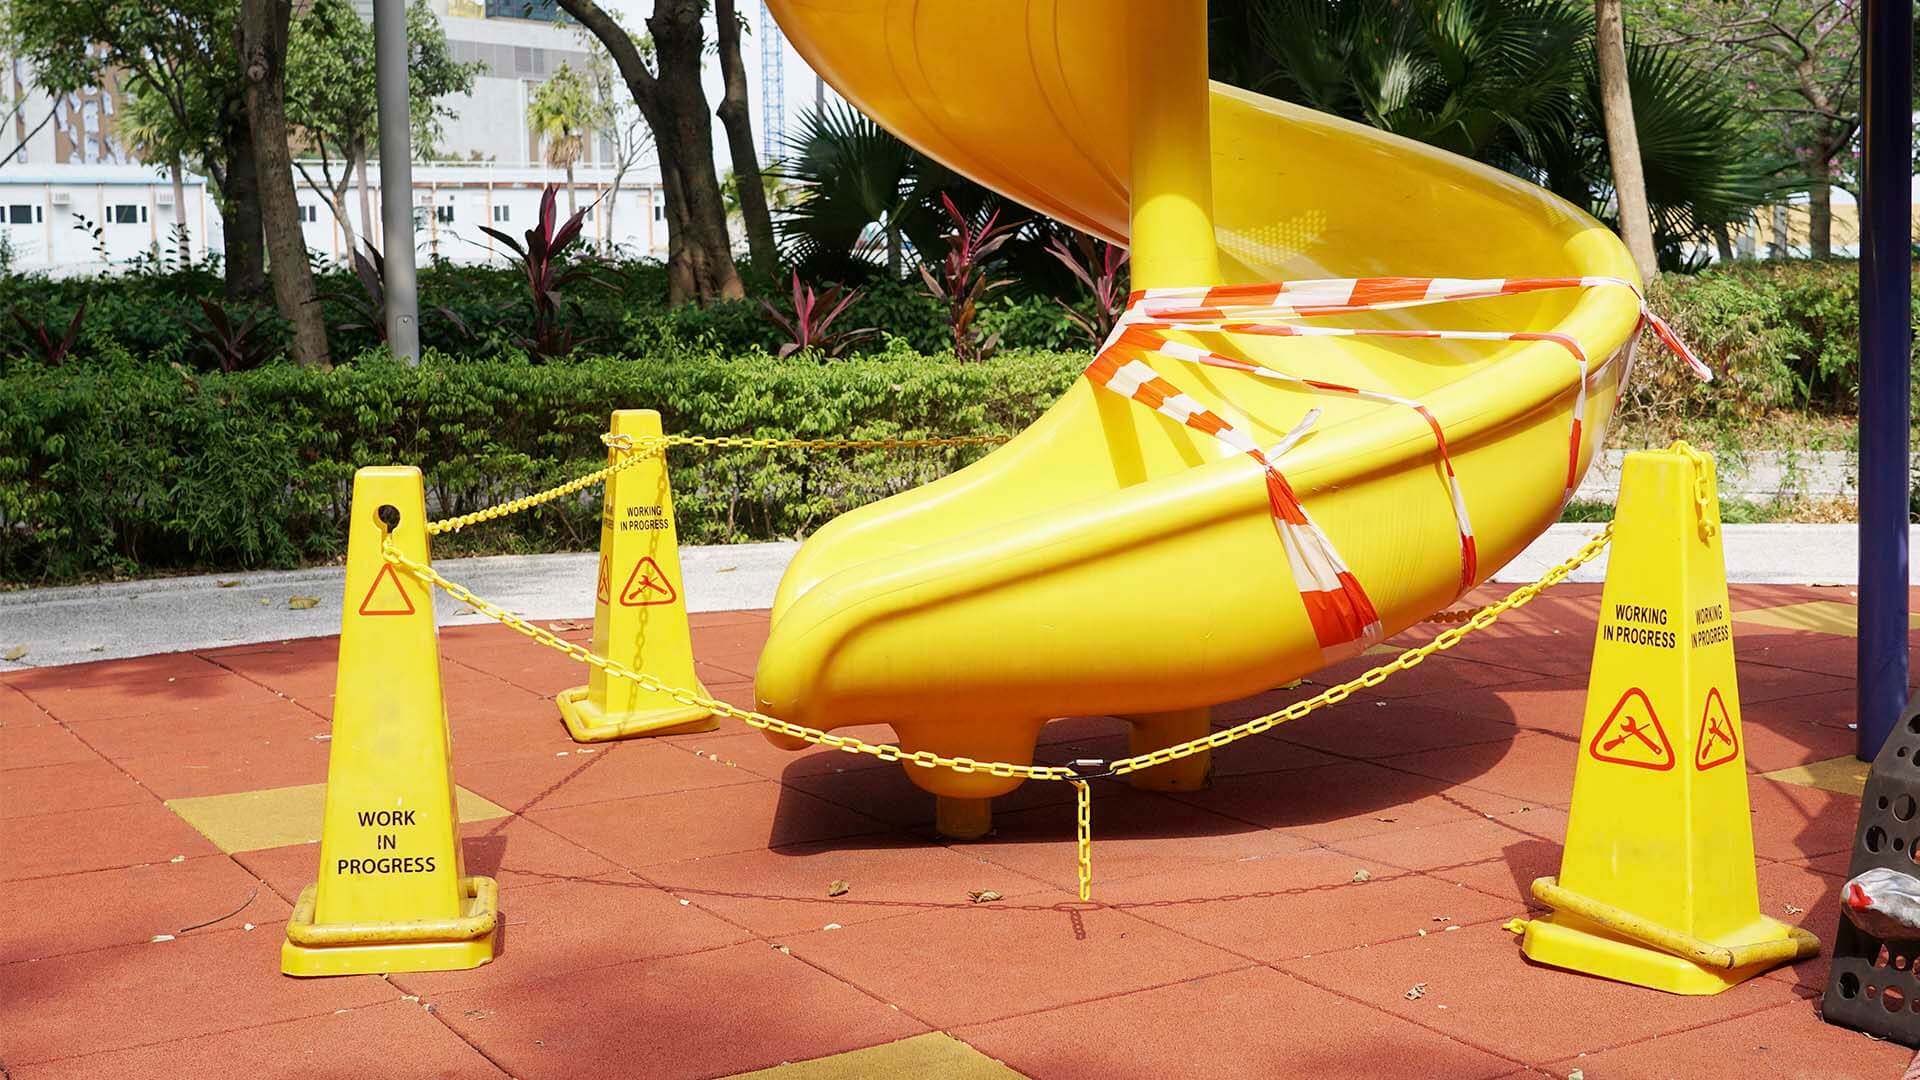 A dangerous playground with a defective slide or jungle gim